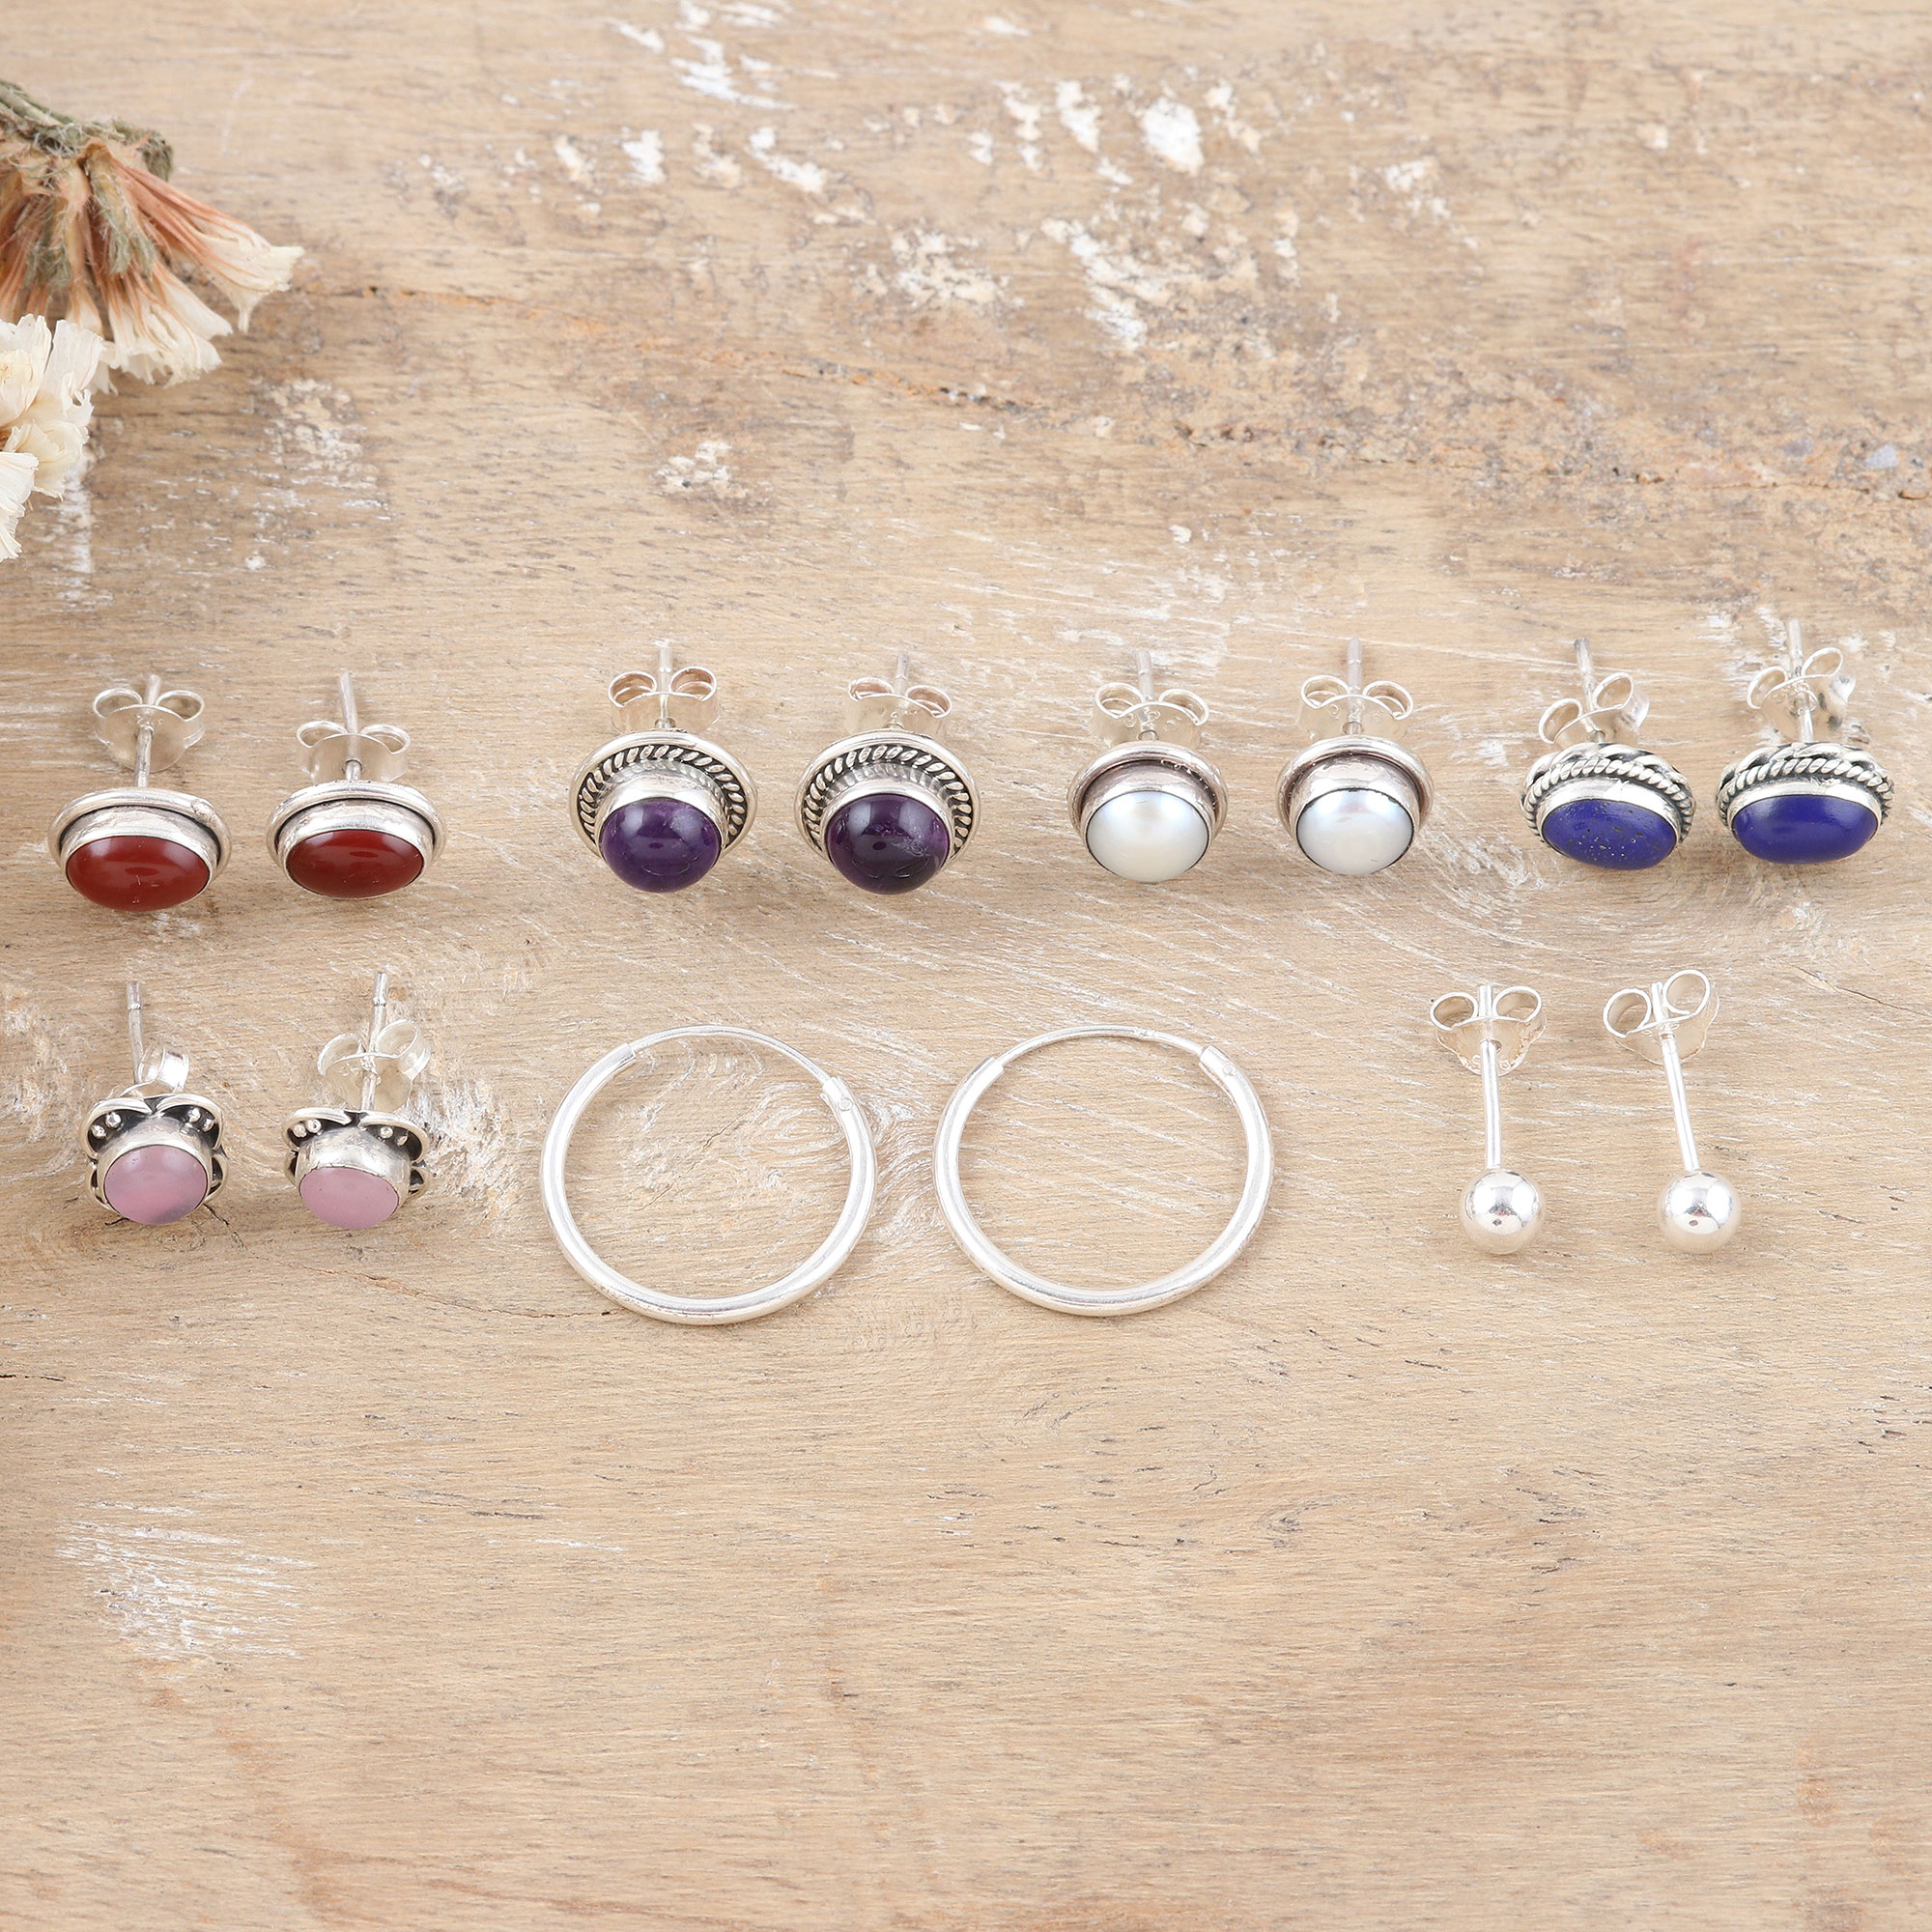 Set of 7 Polished Sterling Silver Earrings with Gemstones - Precious